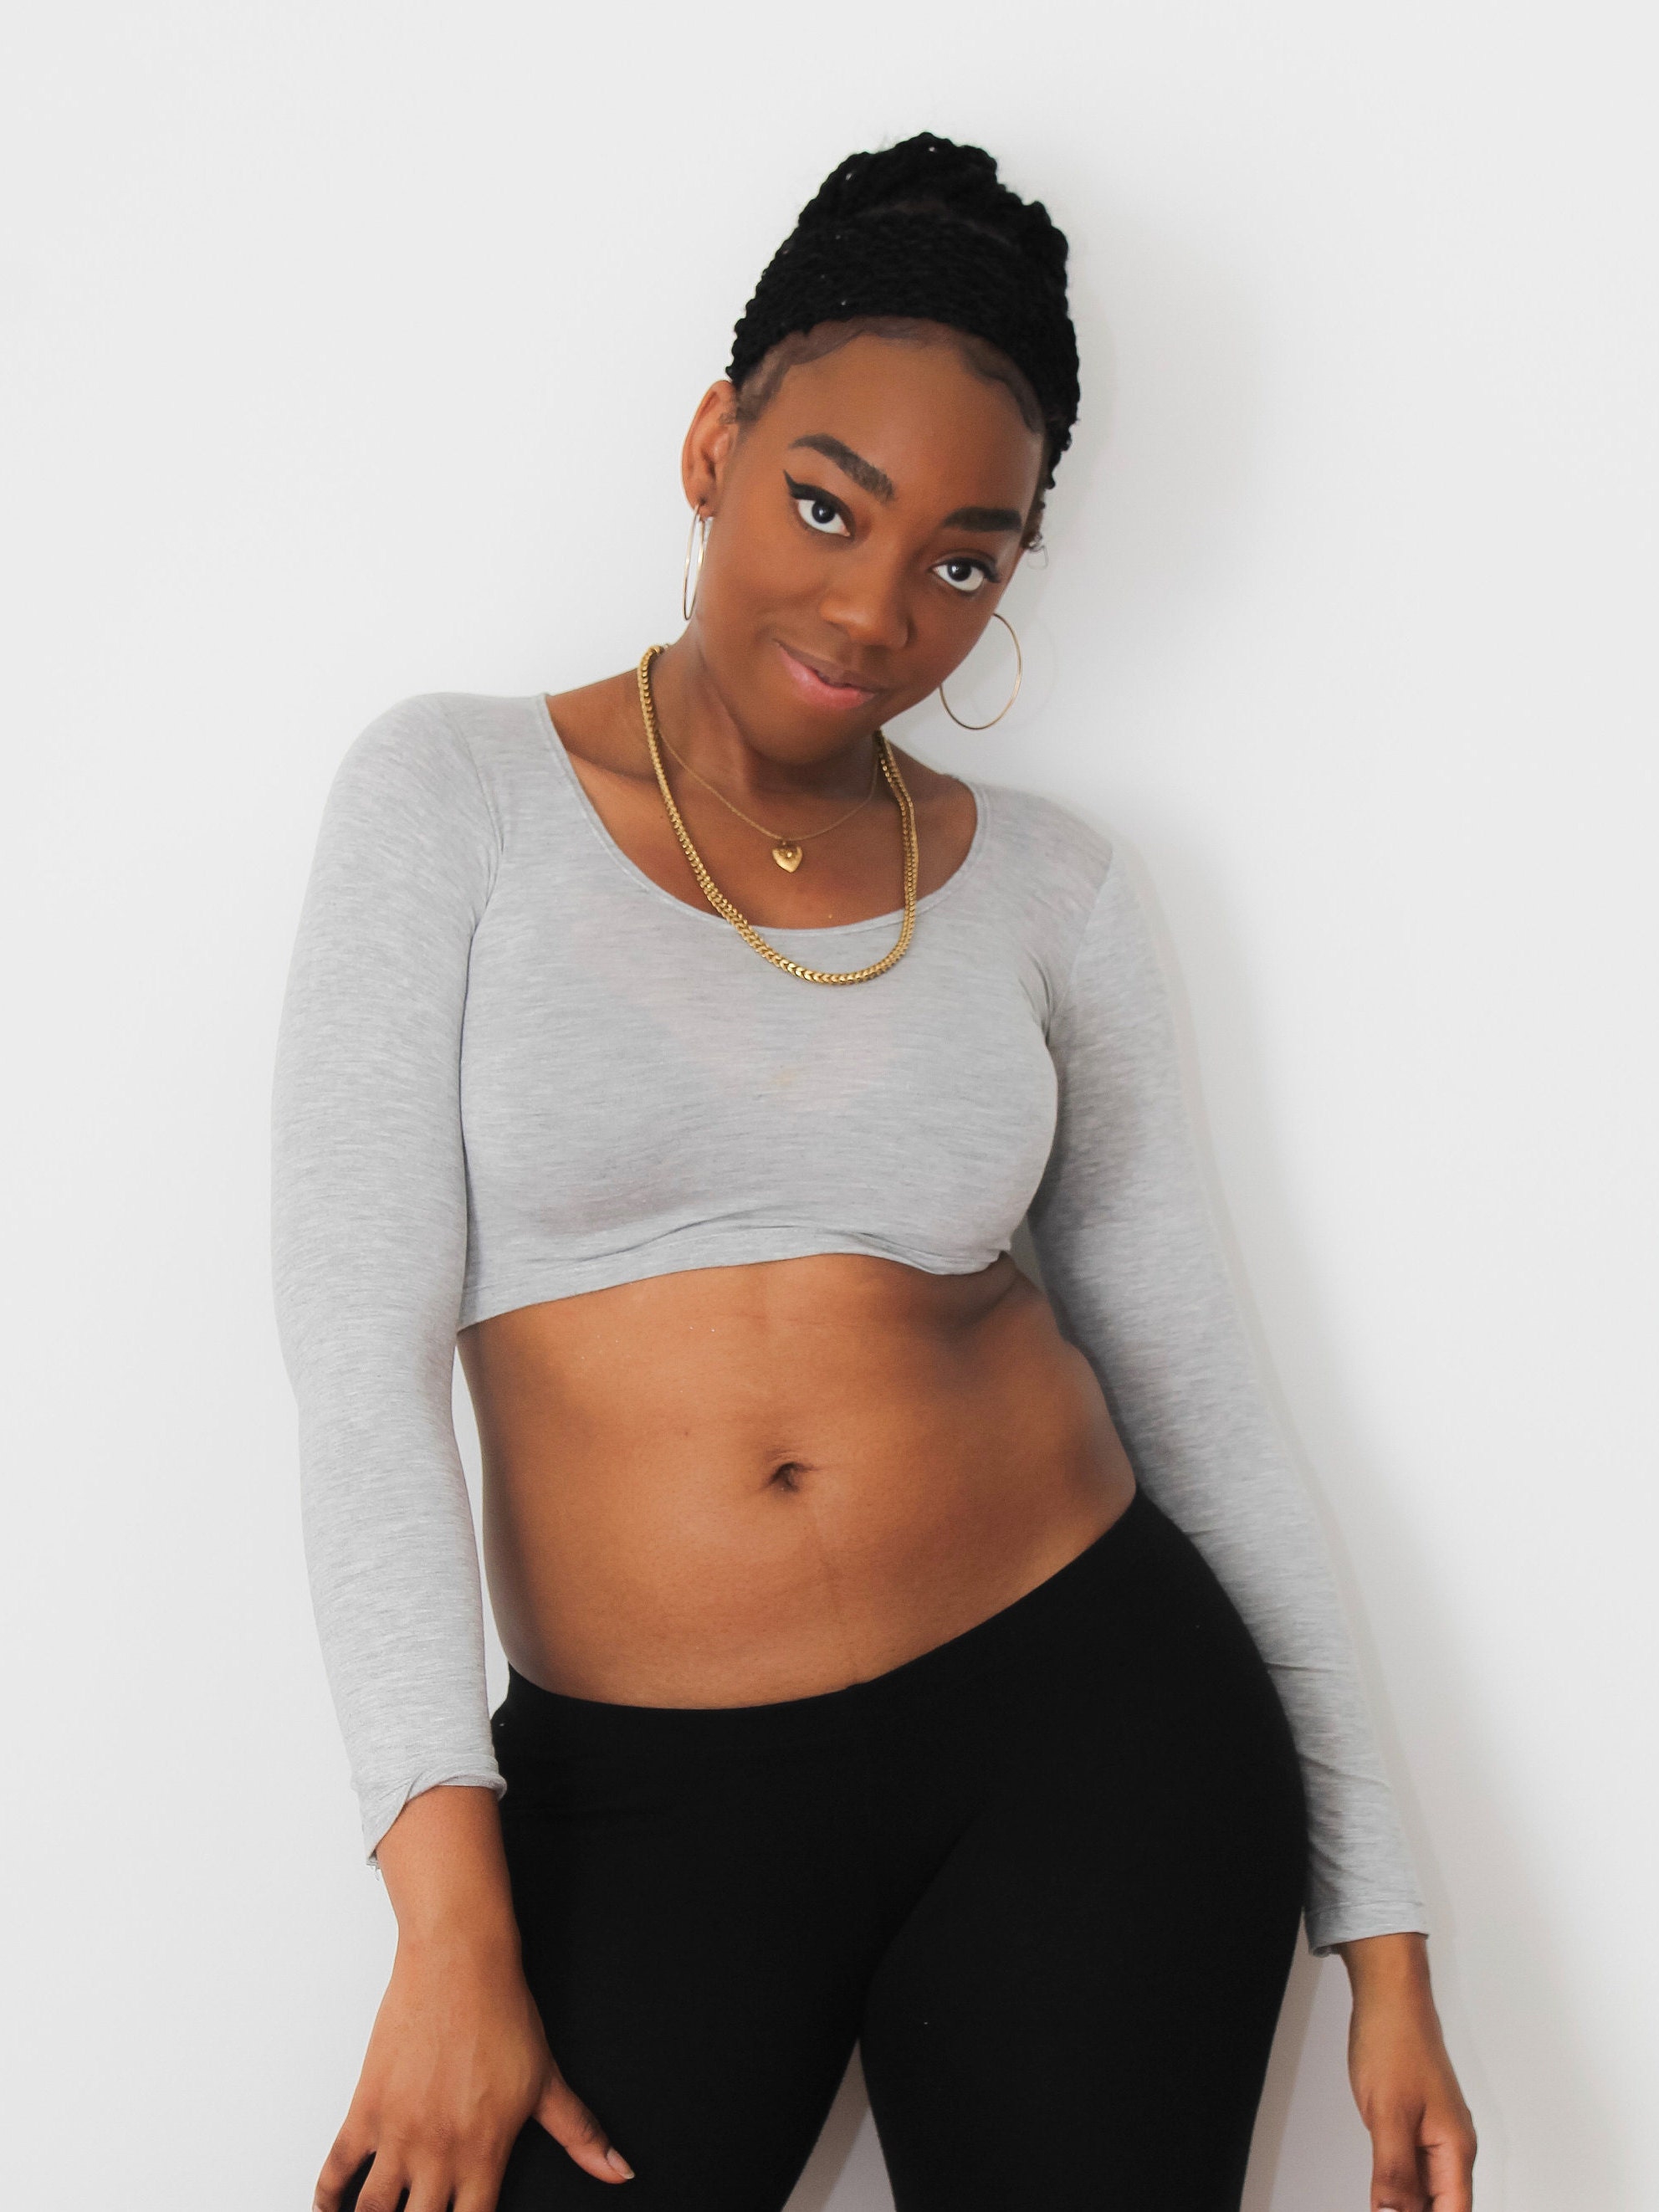 Gray Long Sleeve Crop Top Shirt Form-fitting Basic Plain Crop Tops for  Women Made in USA 